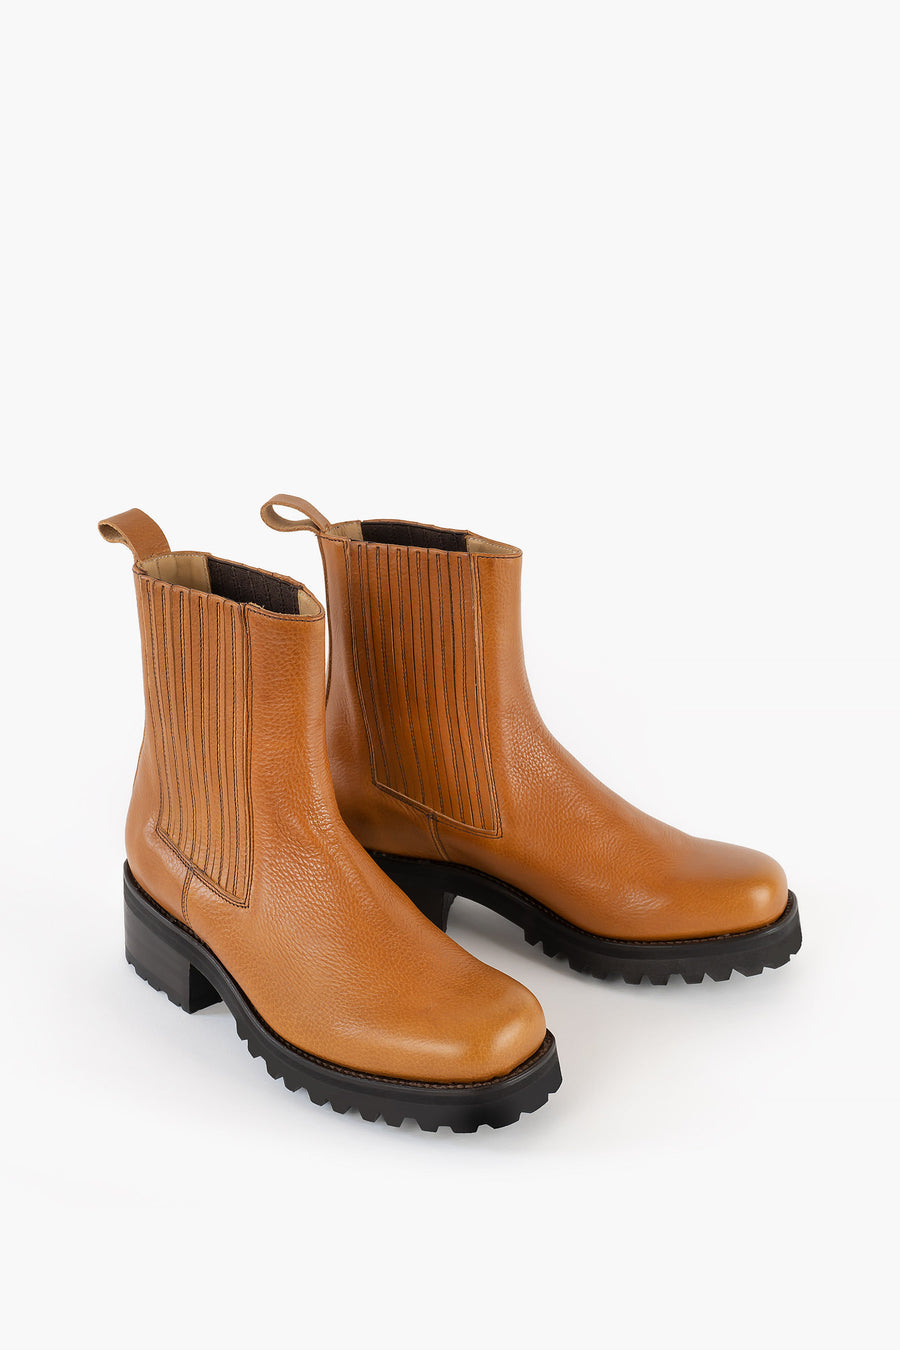 Sustainable, goodyear-welted leather boot made from vegetable tanned leather. Made in Spain. 